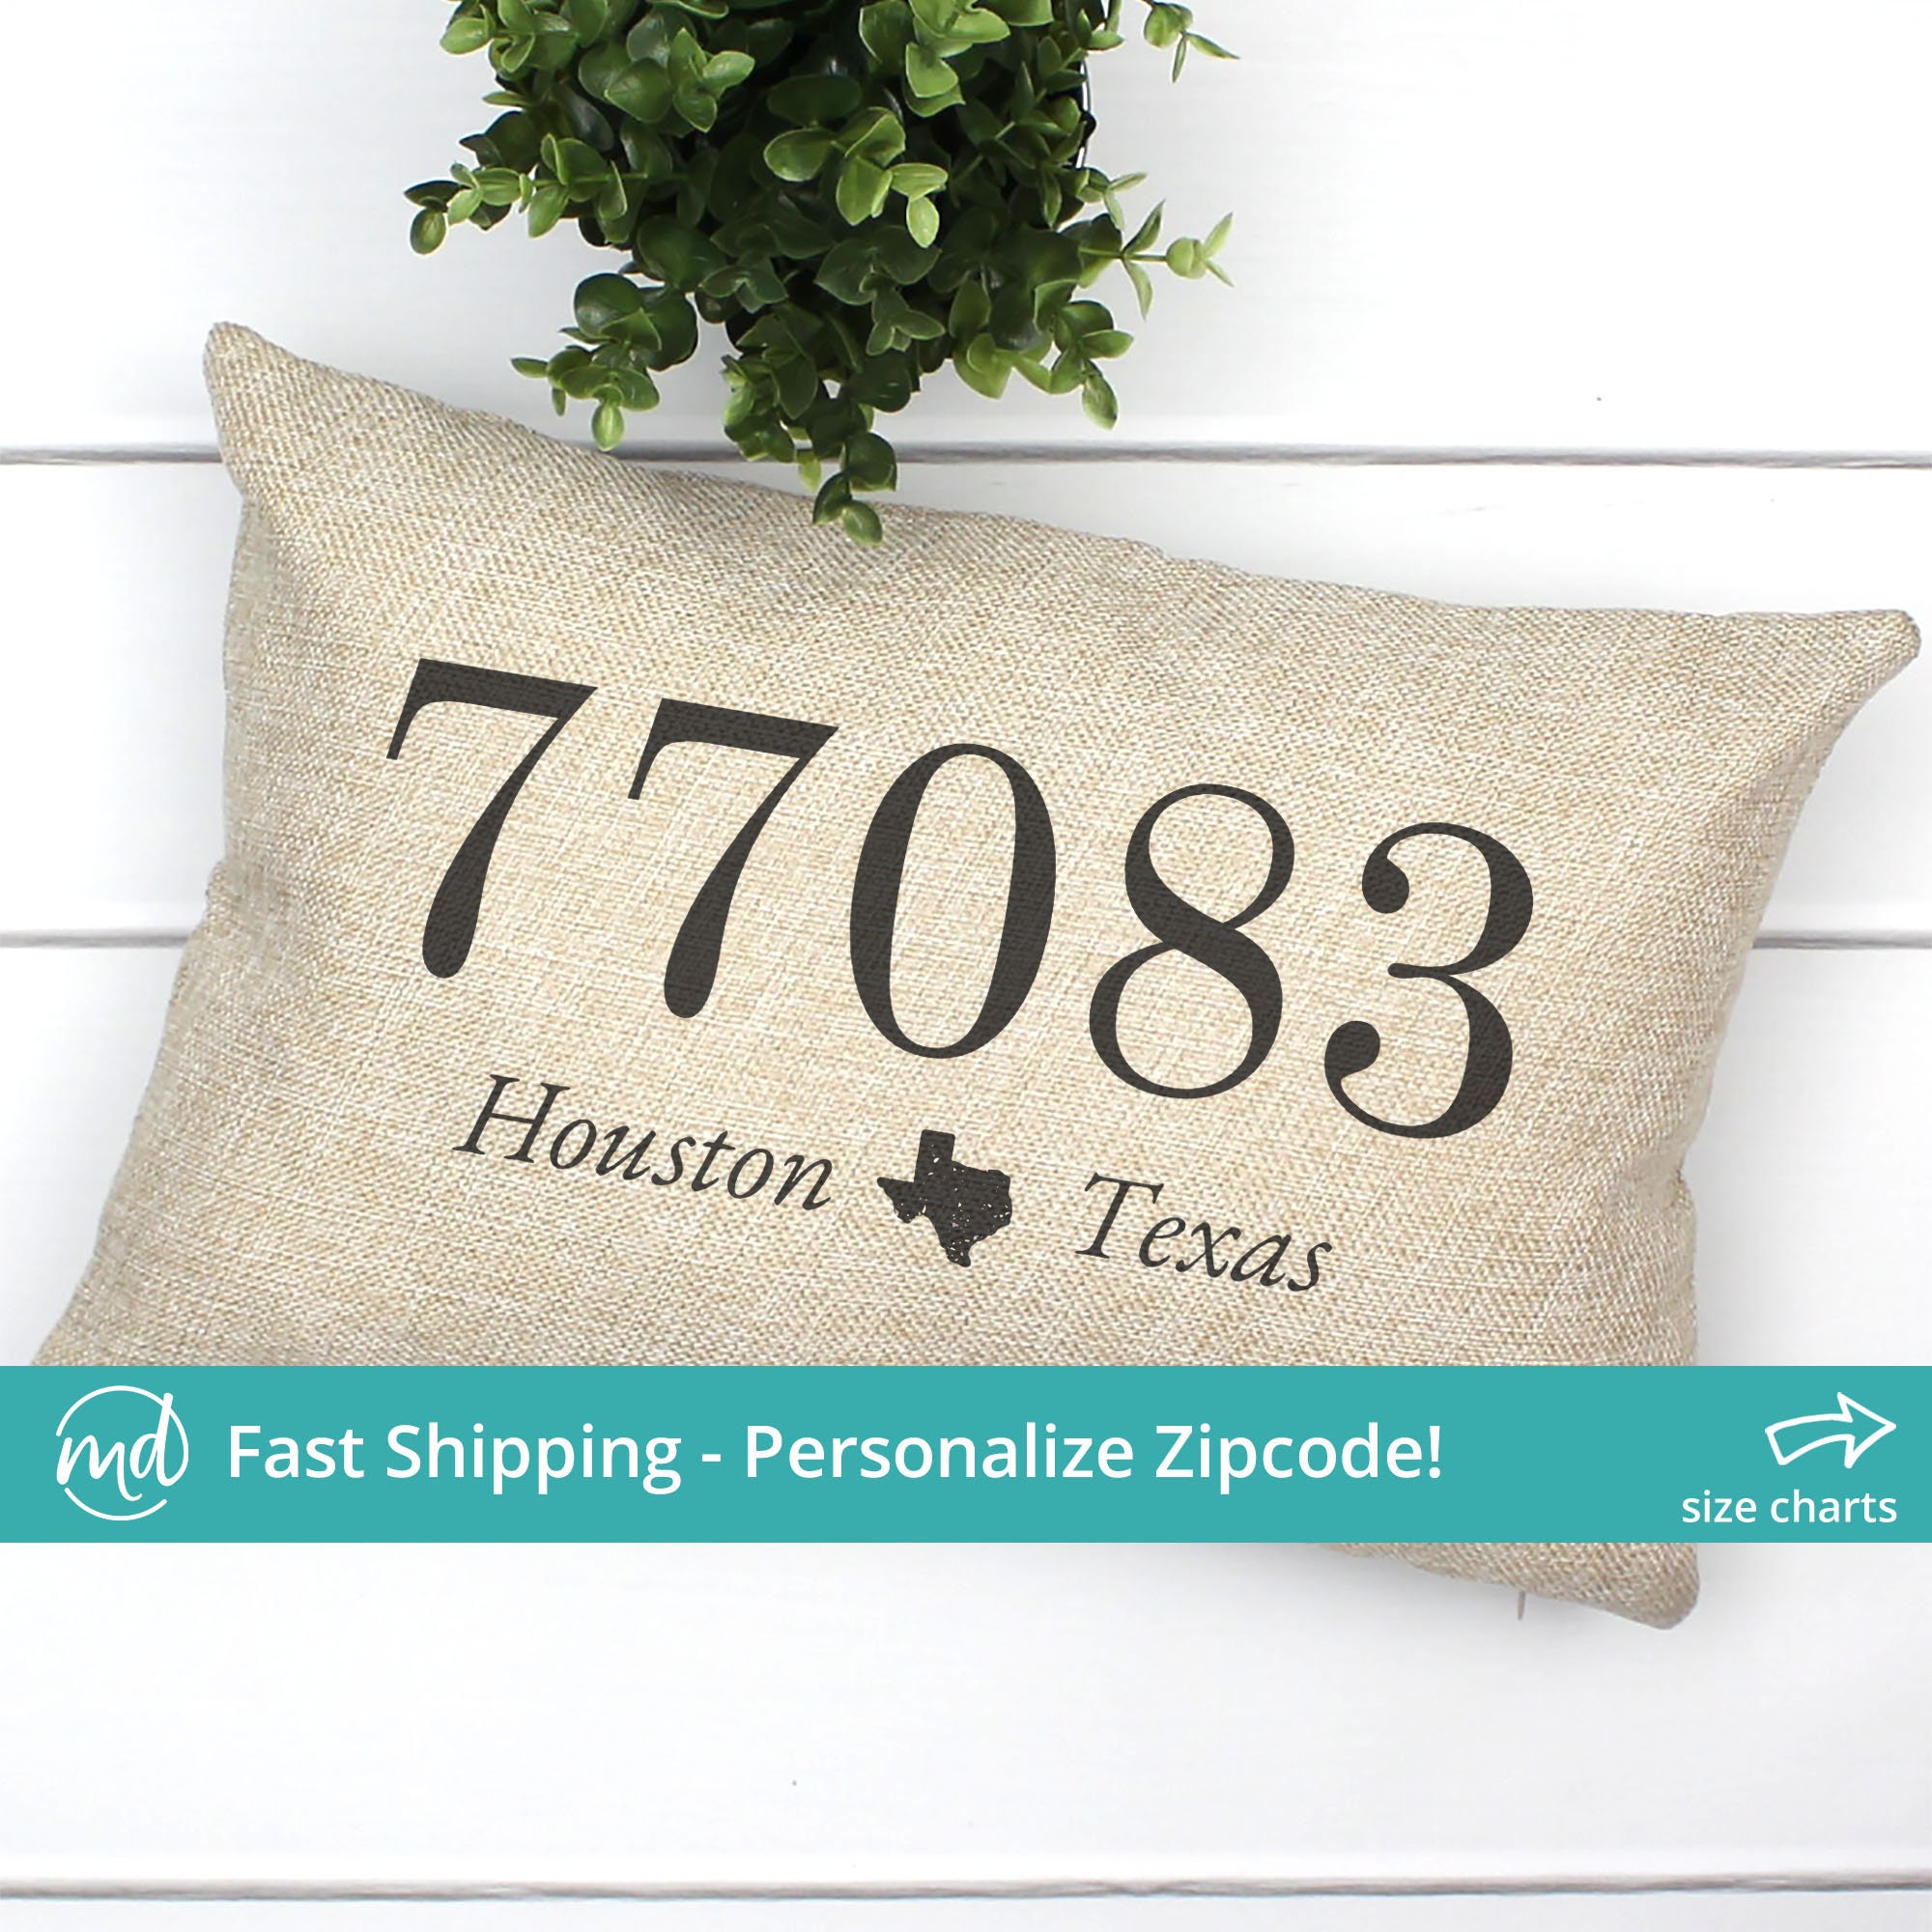 InspiredVisions Zip Code Personalized Pillows Embroidered